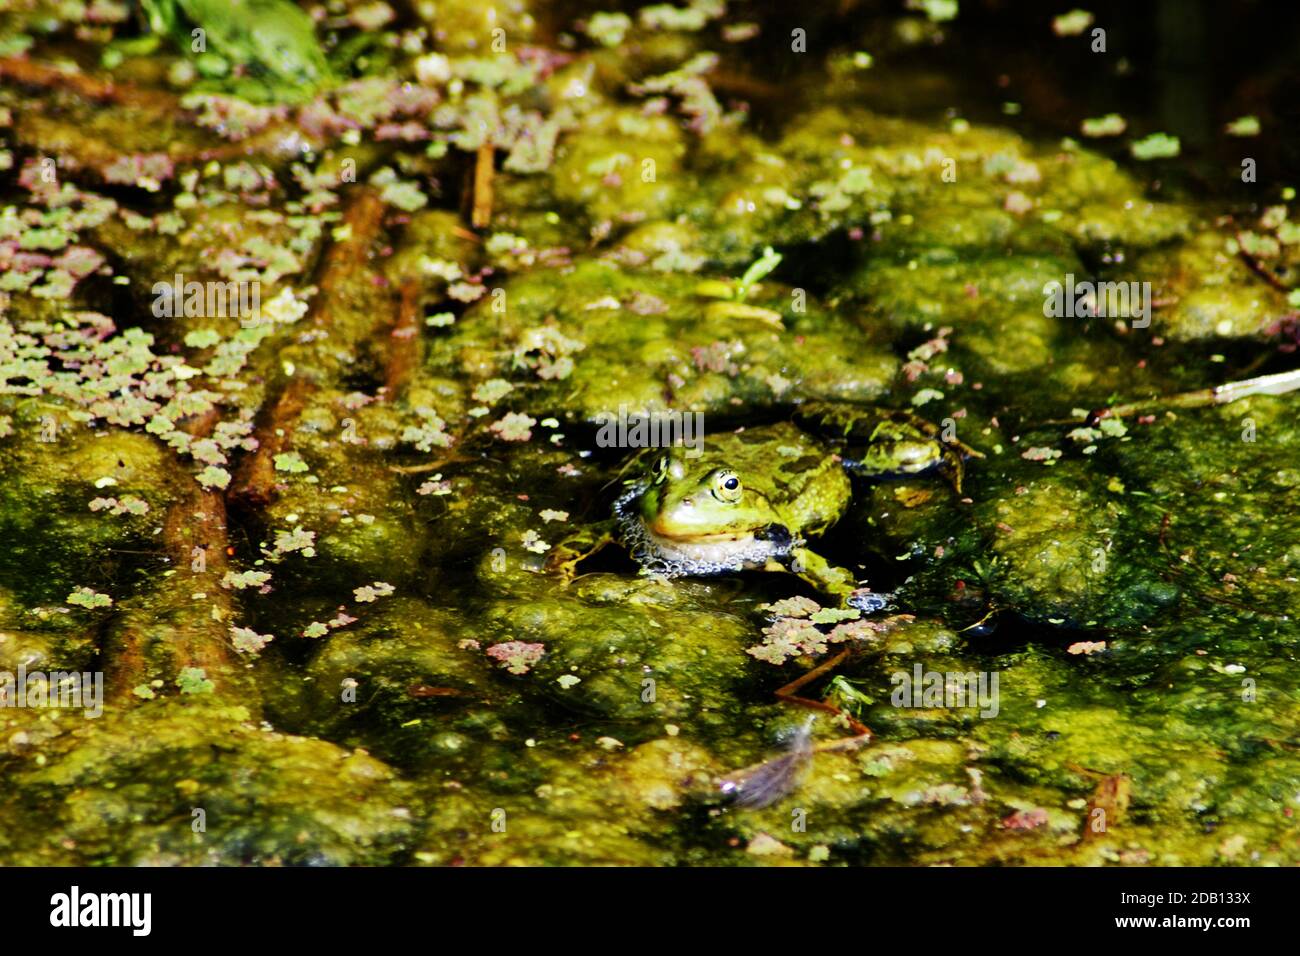 Marsh frog (Pelophylax ridibundus) species of water frog native to Europe, parts of Asia & introduced to the United Kingdom. Largest frog in its range Stock Photo